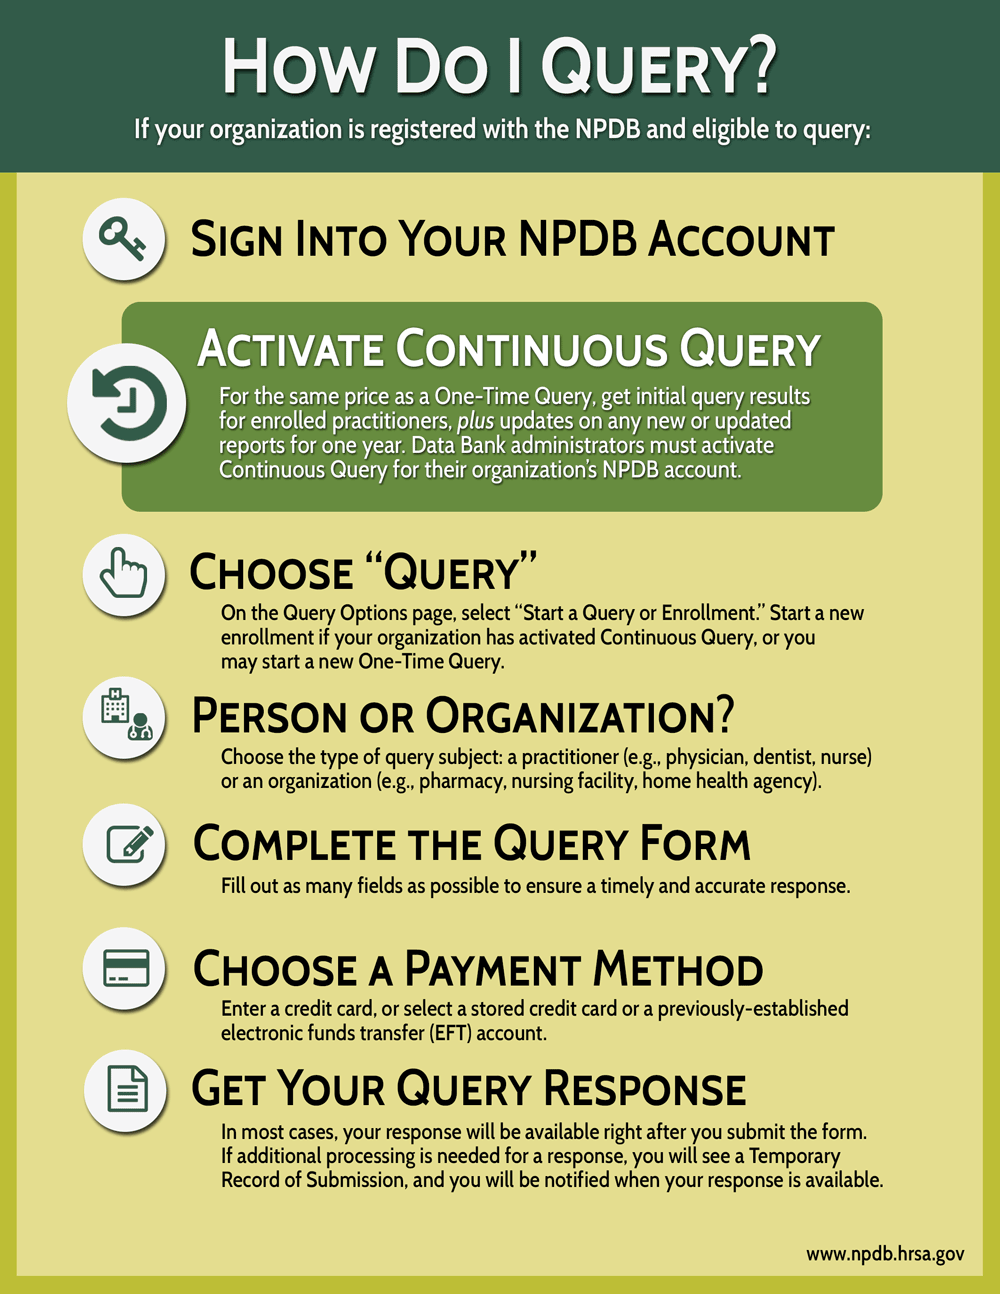 How to Query Infographic. Accessible version below. 